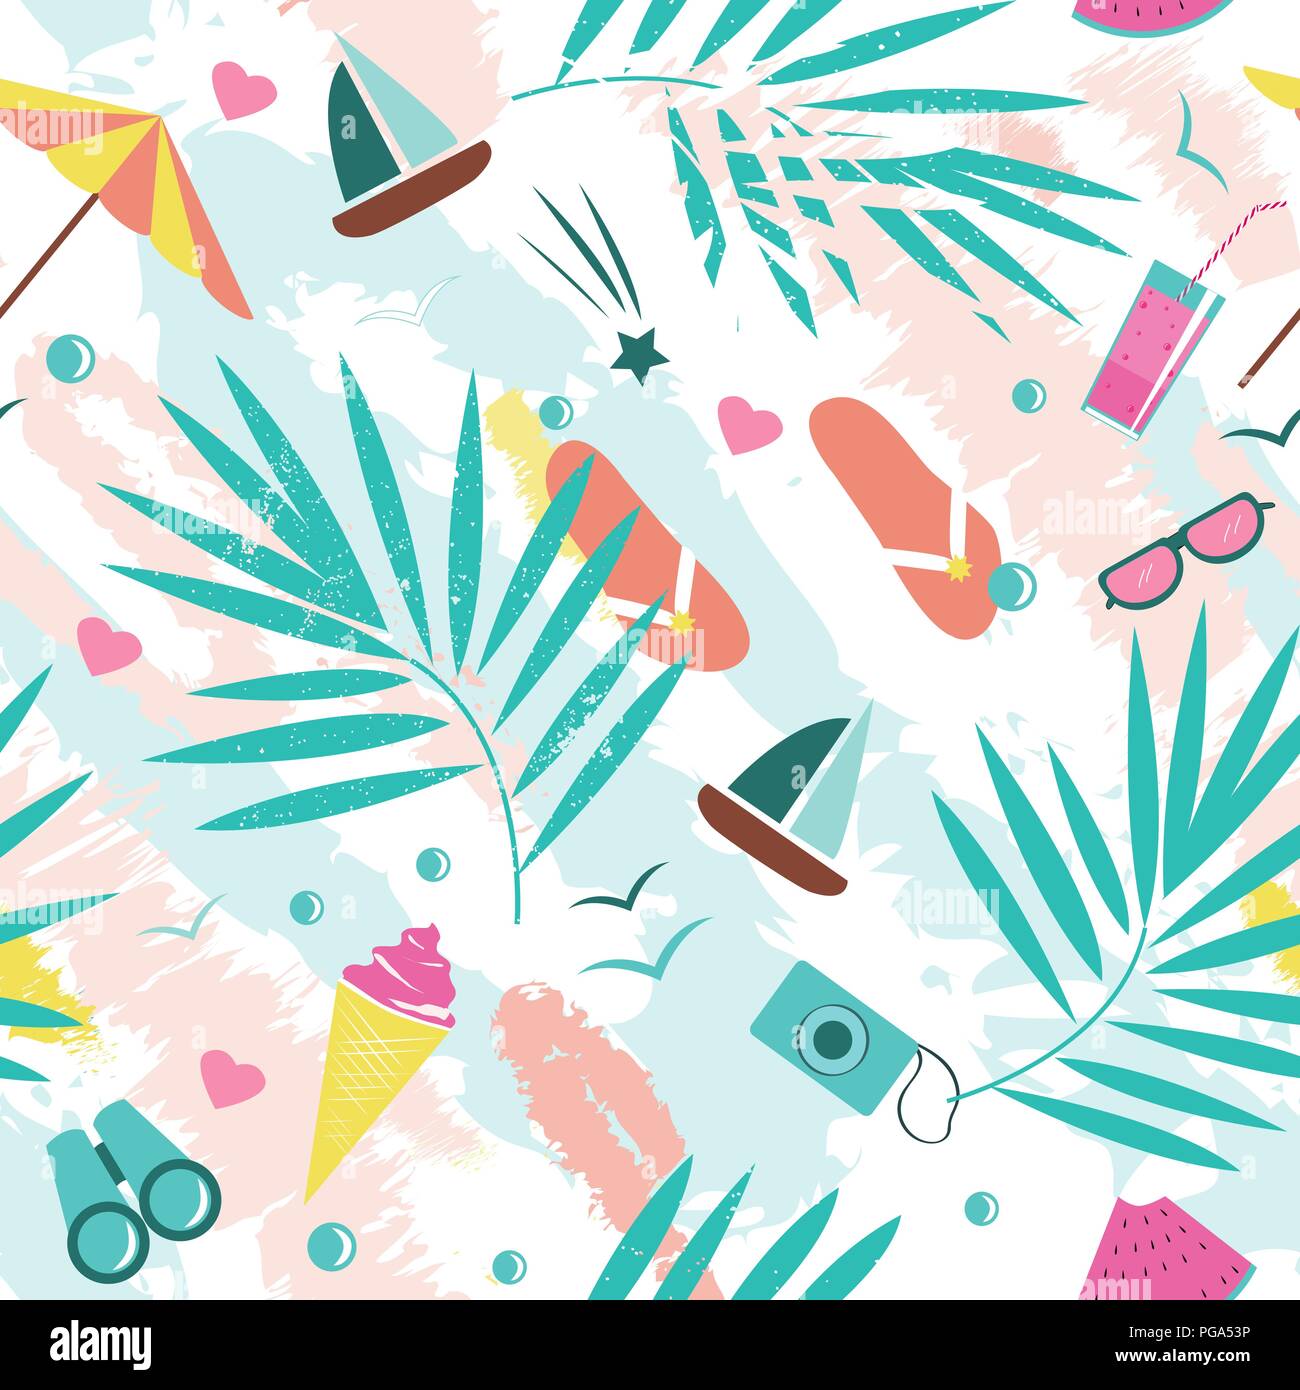 Summer time vector seamless pattern with colorful beach elements